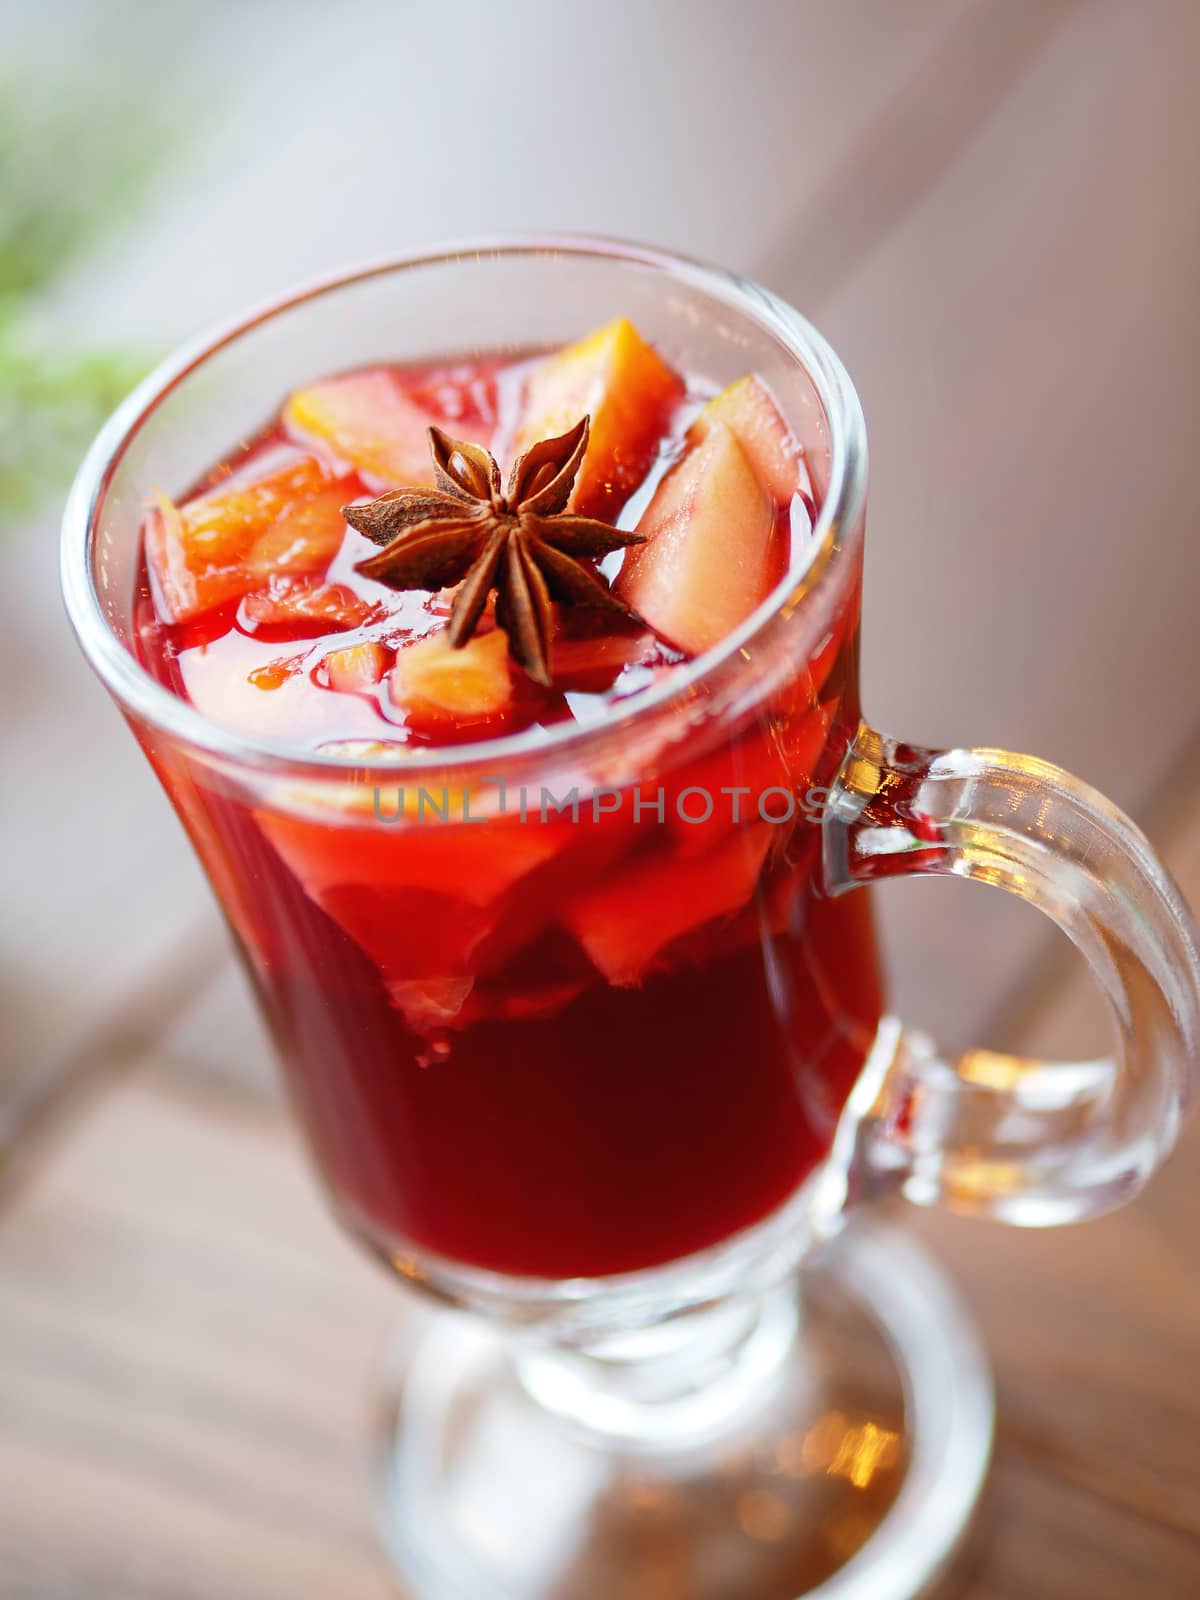 Glass of mulled wine with grapefruit, orange crusts and star anise or illicium seeds. Warming drink with or without alcohol.